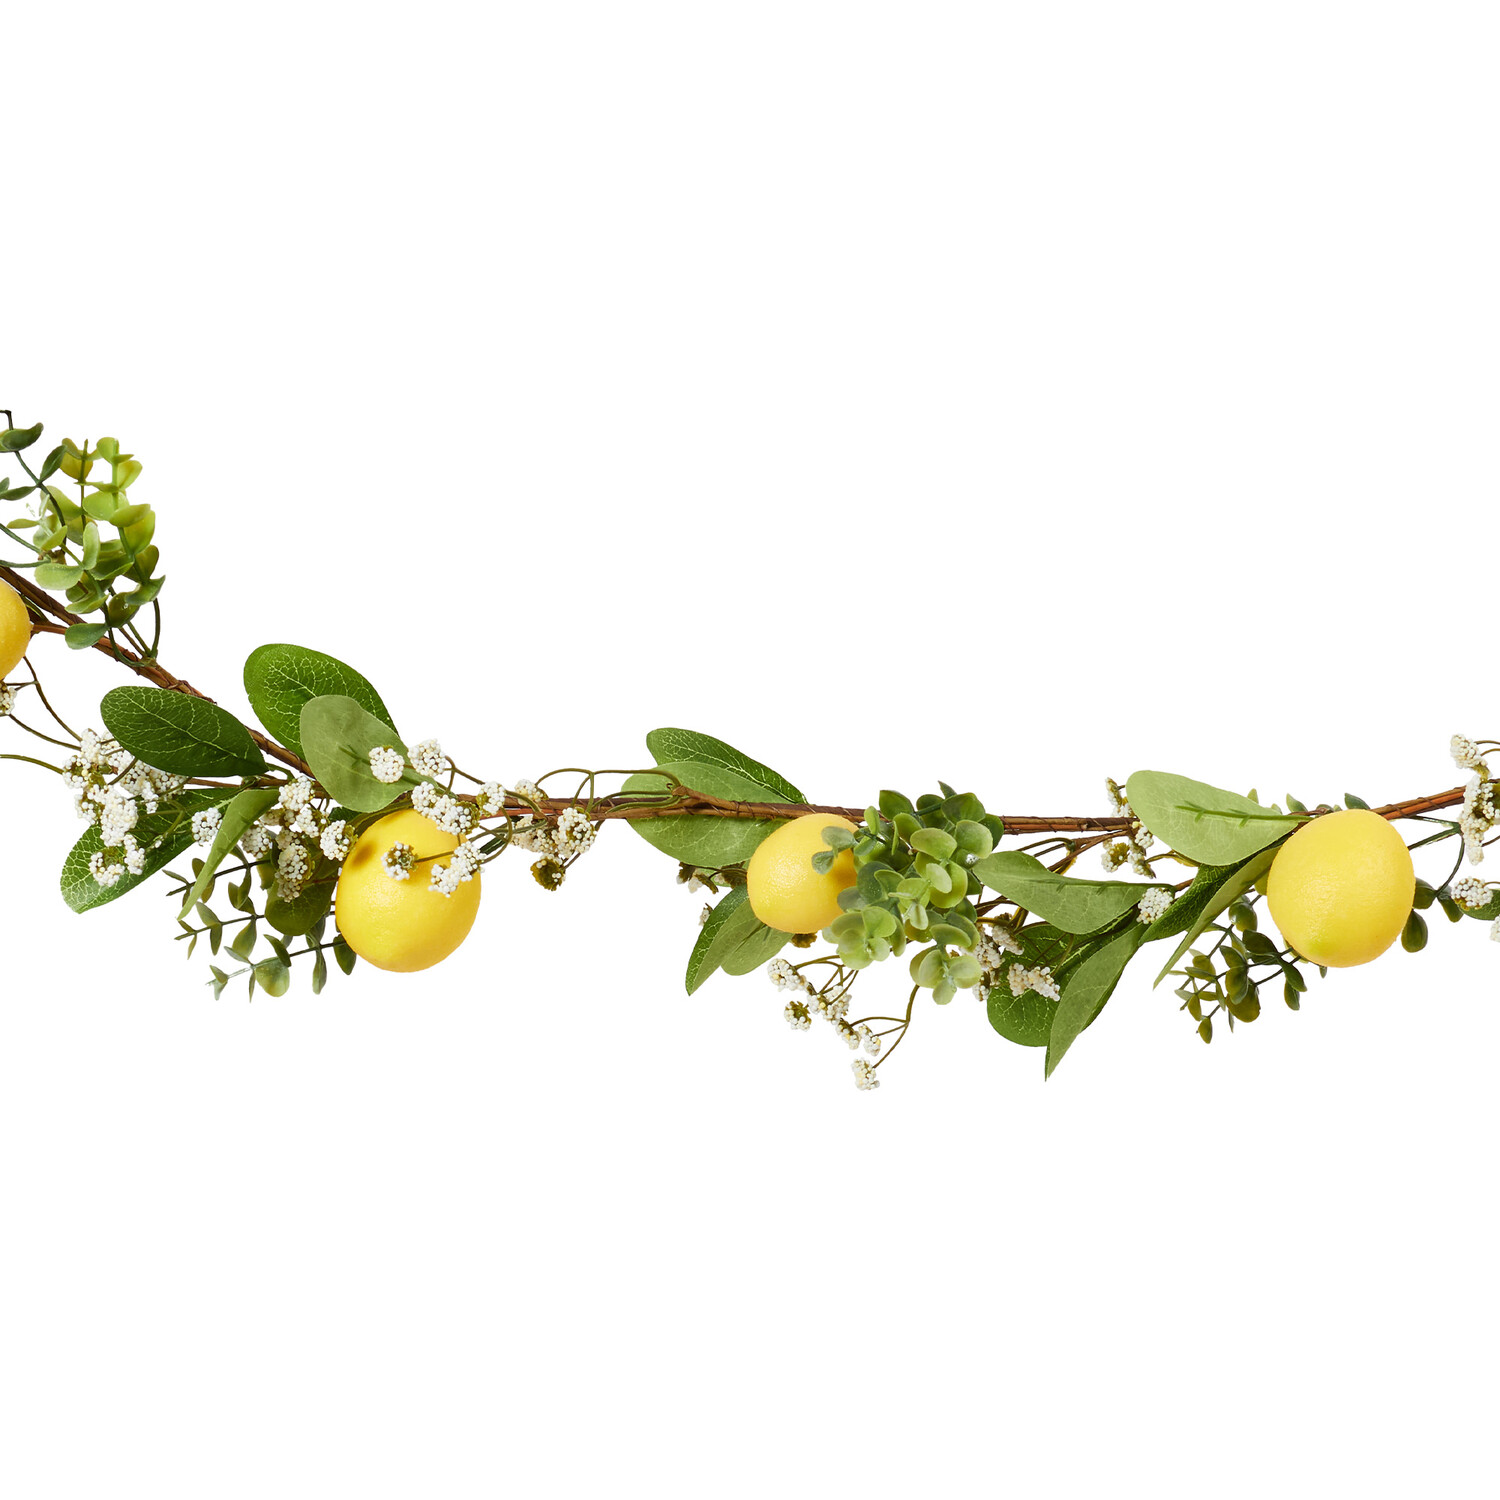 Green Garland with Lemons and Leaves Image 2